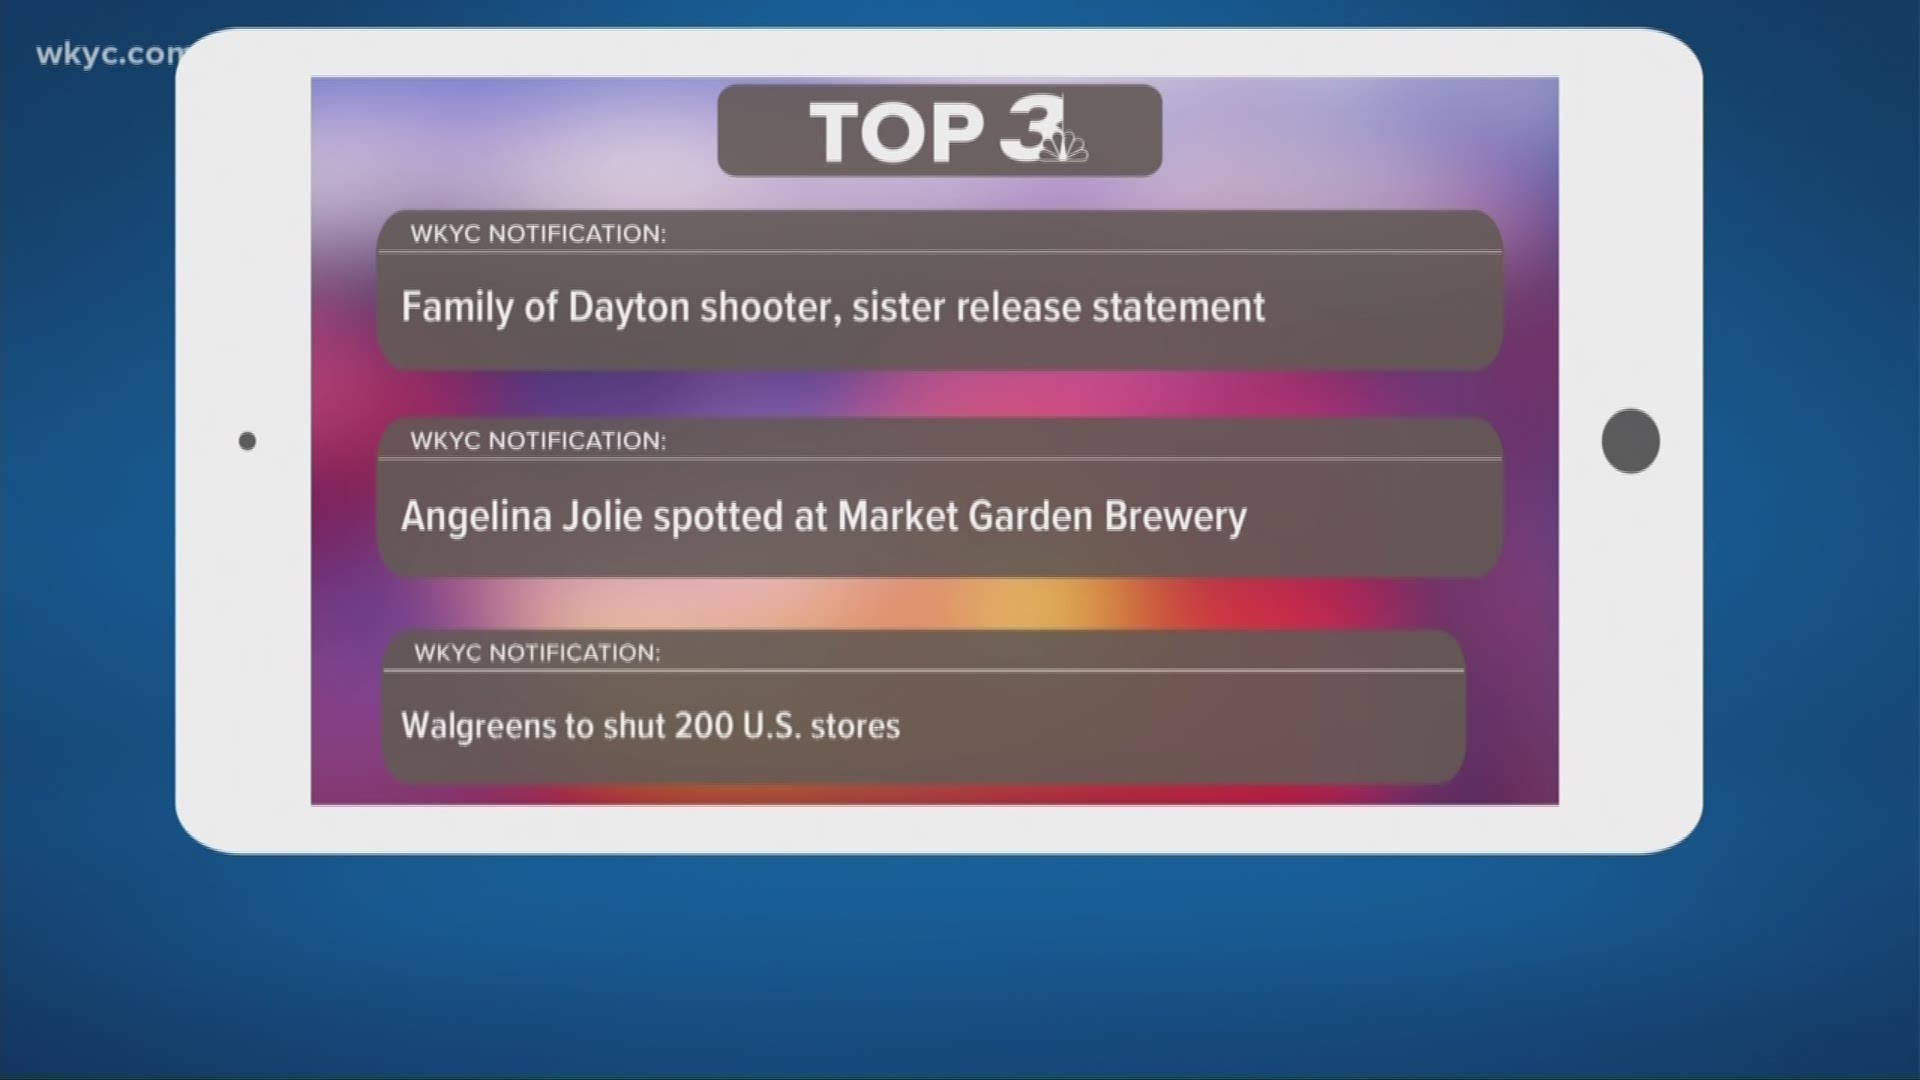 Check out the top 3 trending stories for August 6, 2019 trending at WKYC.com